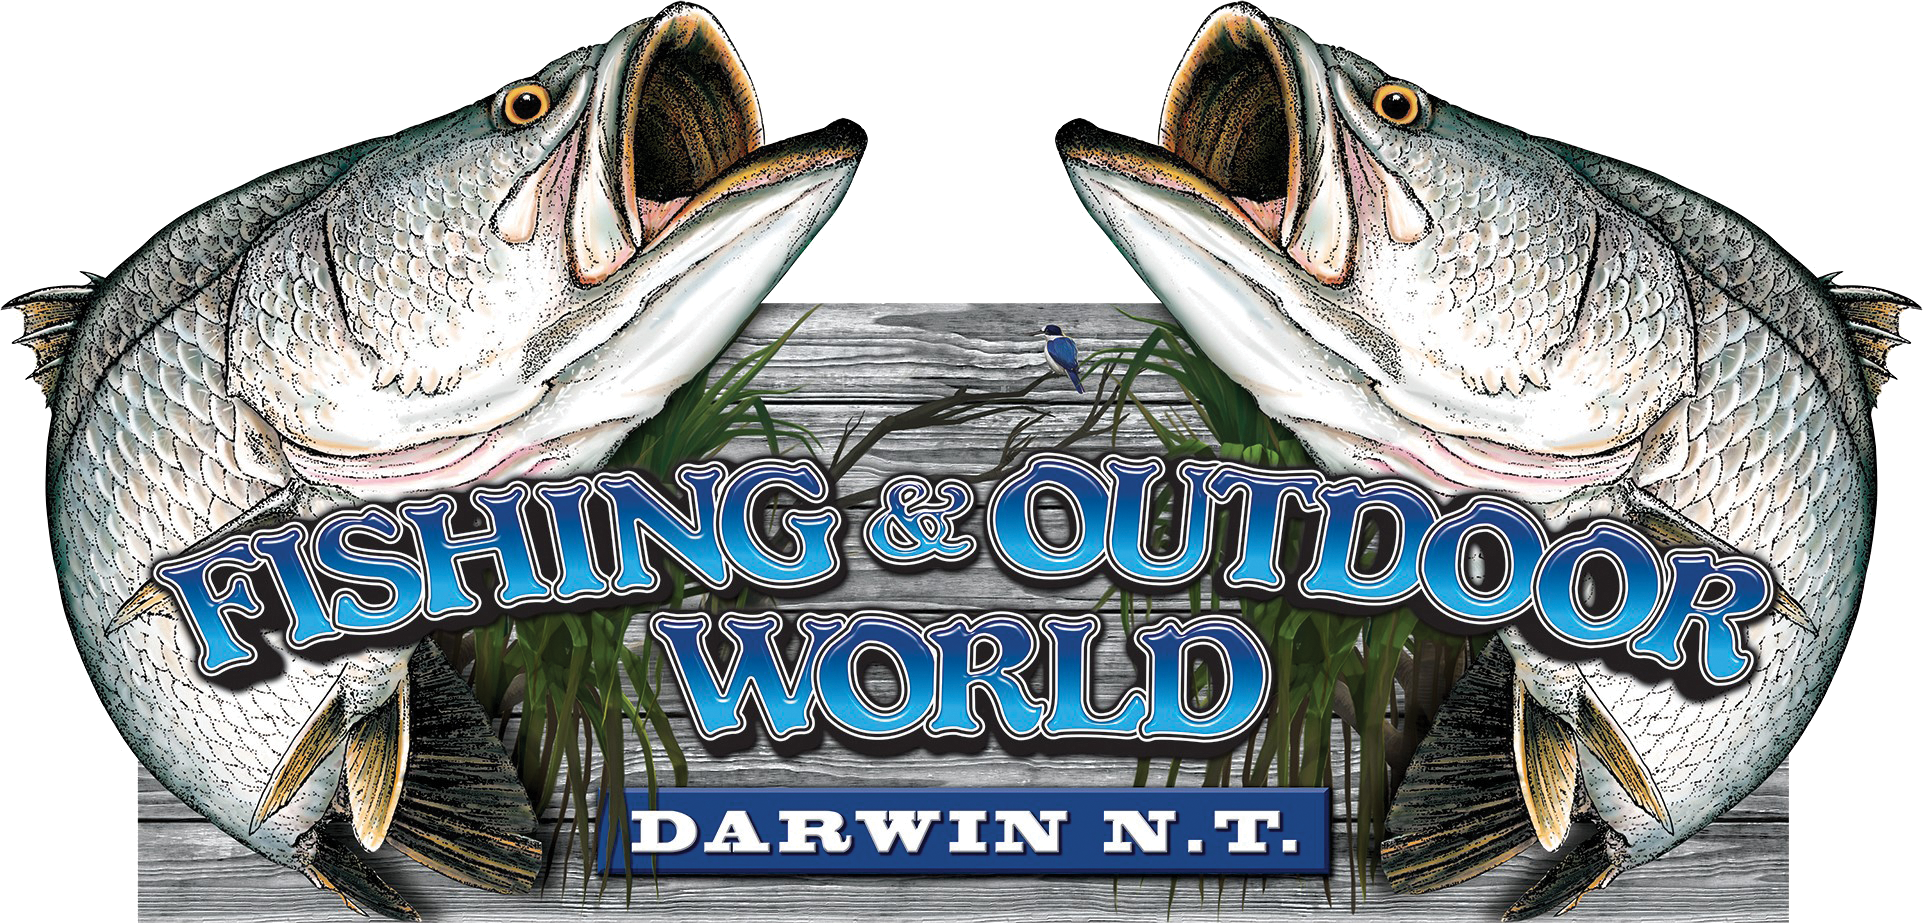 Fishing and Outdoor World